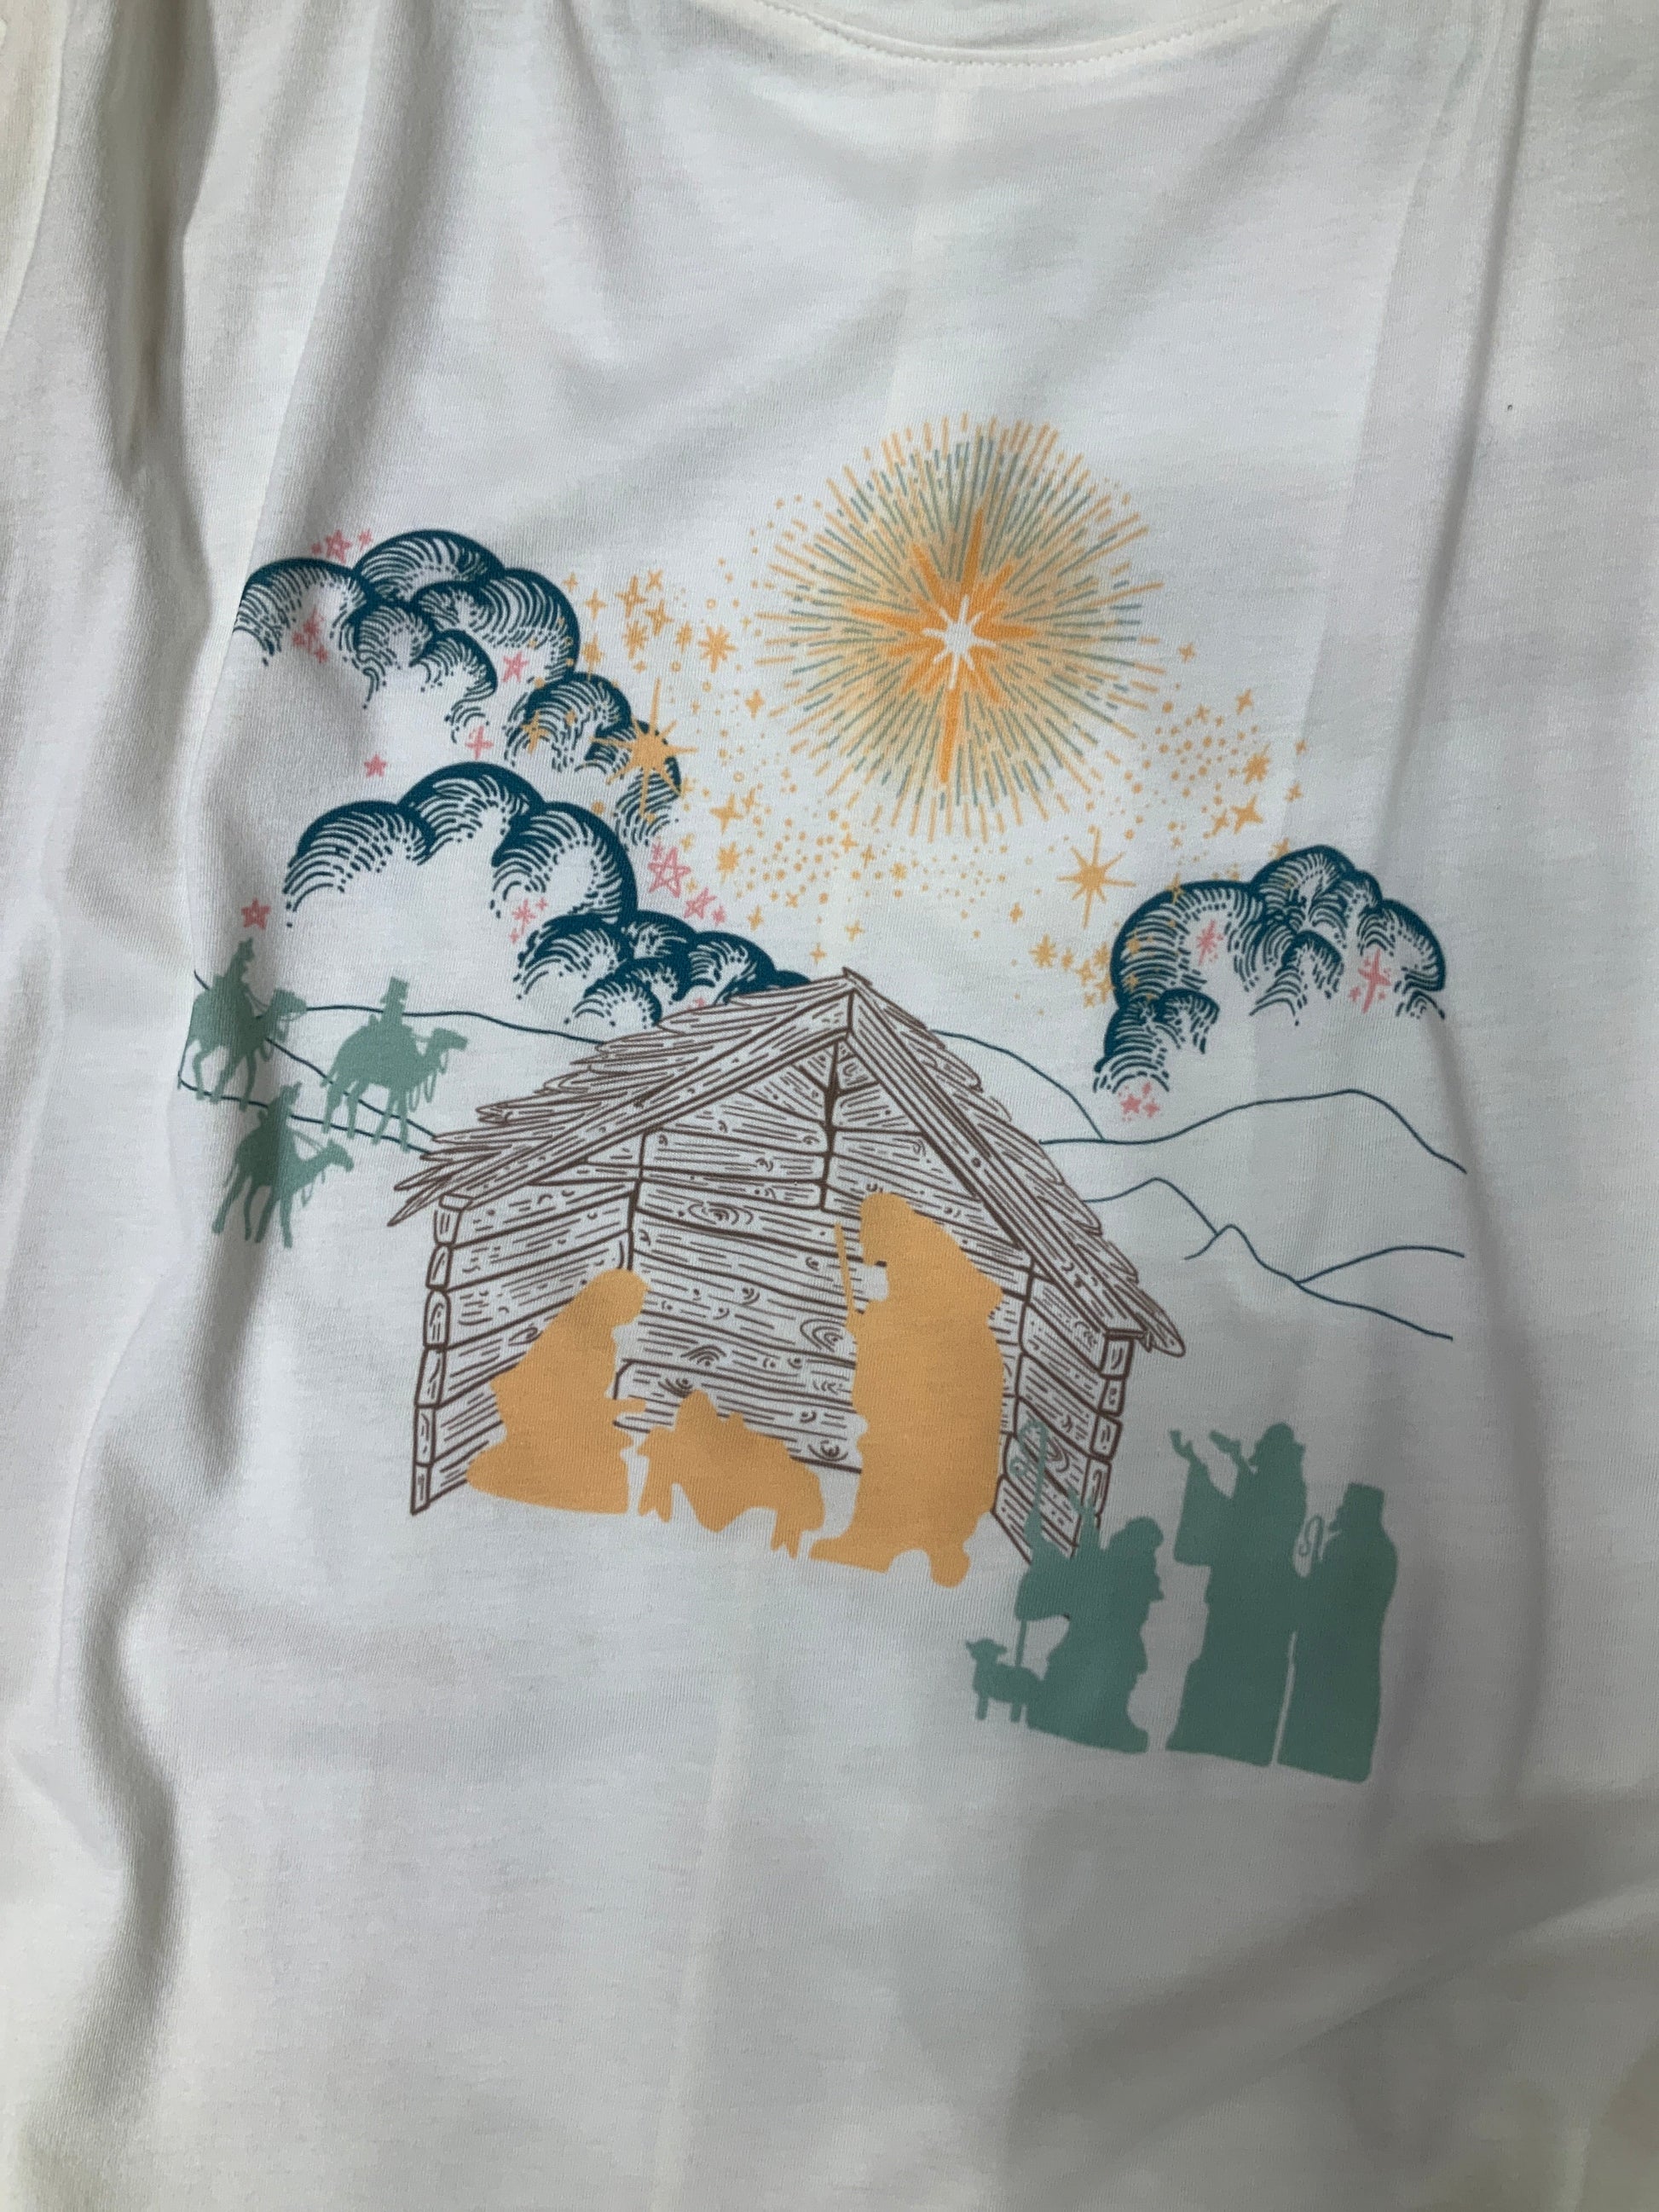 White T Shirt depicting a nativity scene. Green clouds Gold Stars. Yellow Mary Joseph and baby Jesus silhouette, all other silhouettes are light teal